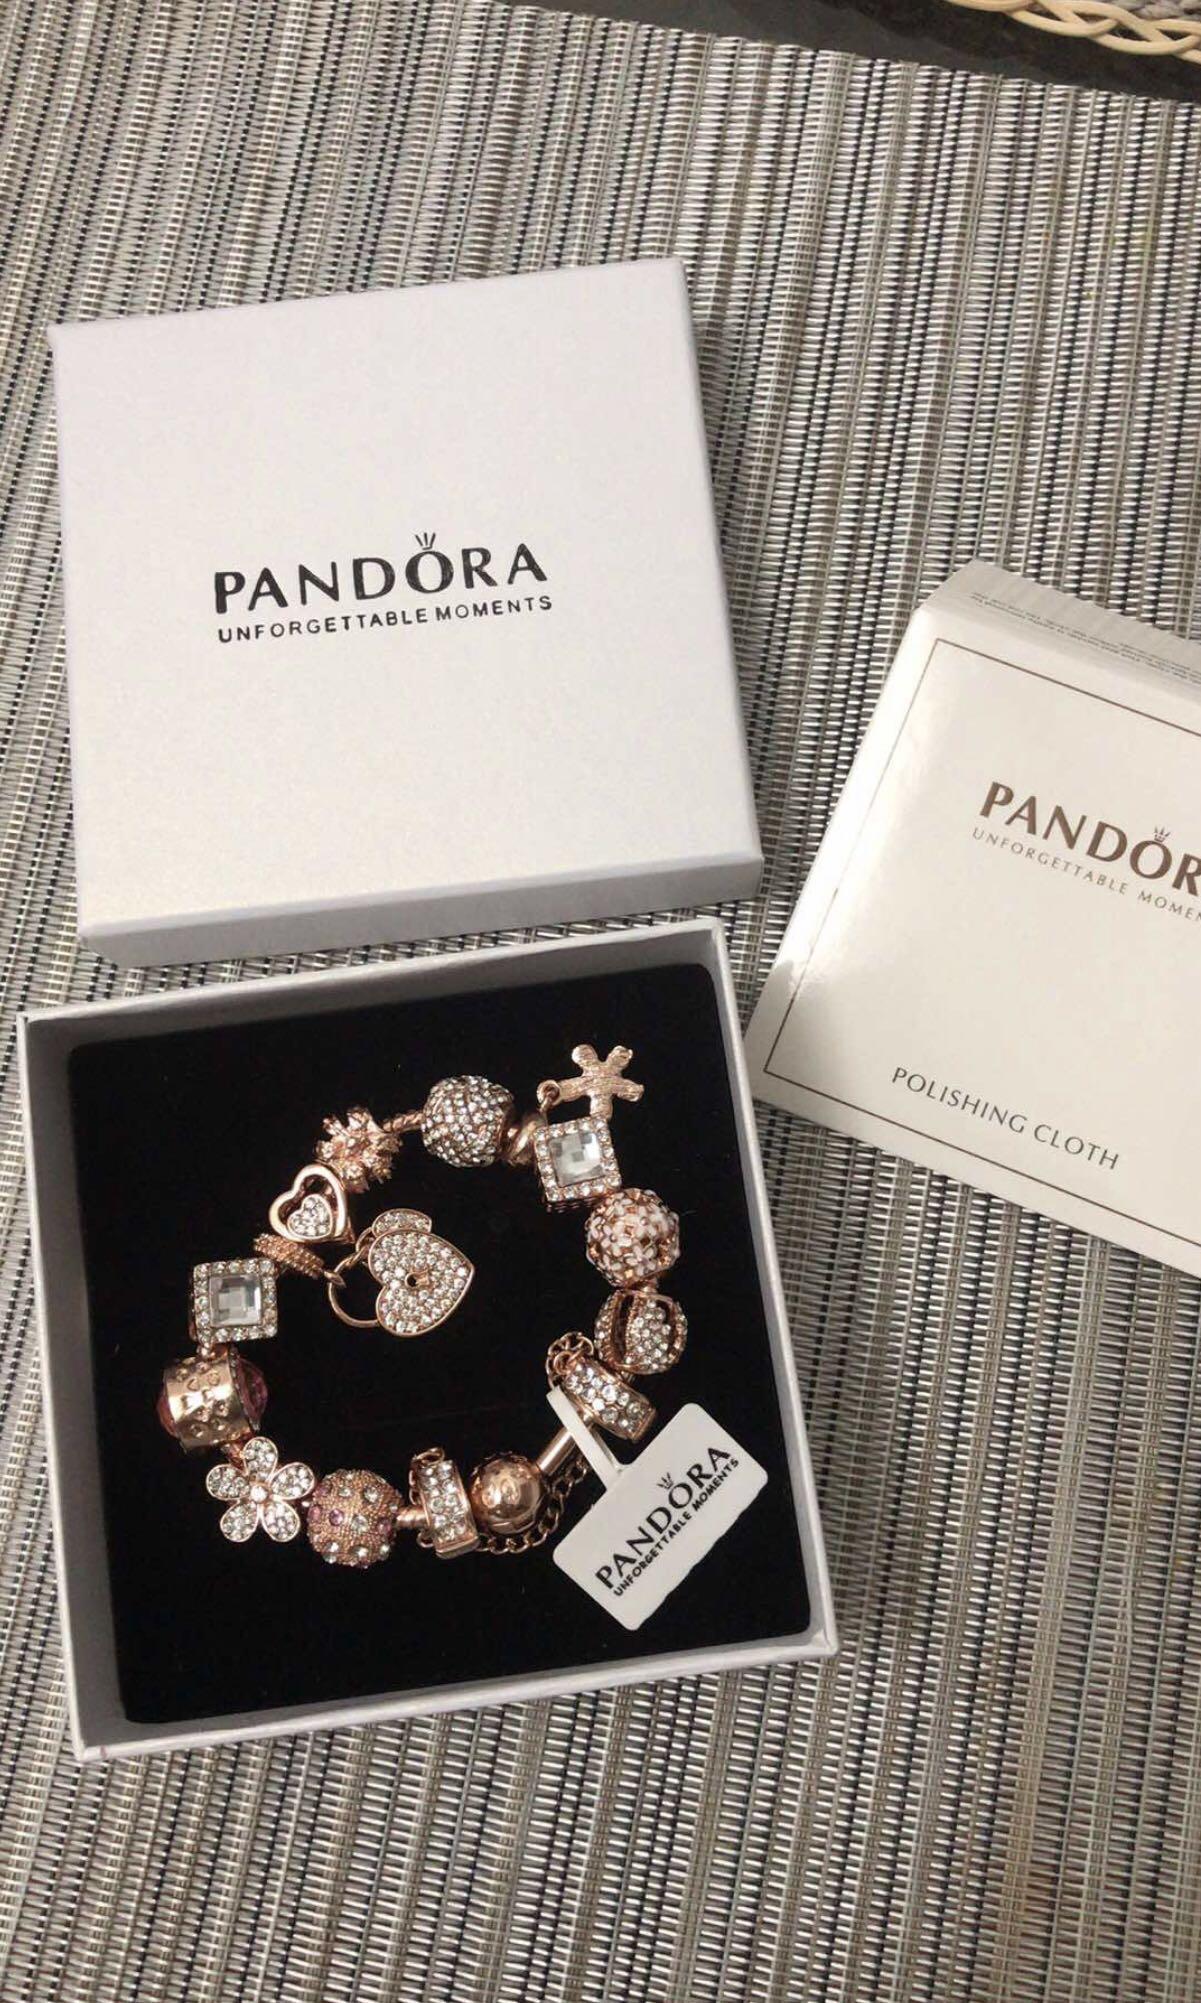 Authentic Pandora Unforgettable Moment Houston Dangle Charm Sterling Silver  Hallmarked S925 ALE Item USB791169-G045 NWOT Travel Memories - Etsy Canada  | Pandora travel charms, Pandora leather bracelet, Dangle charms